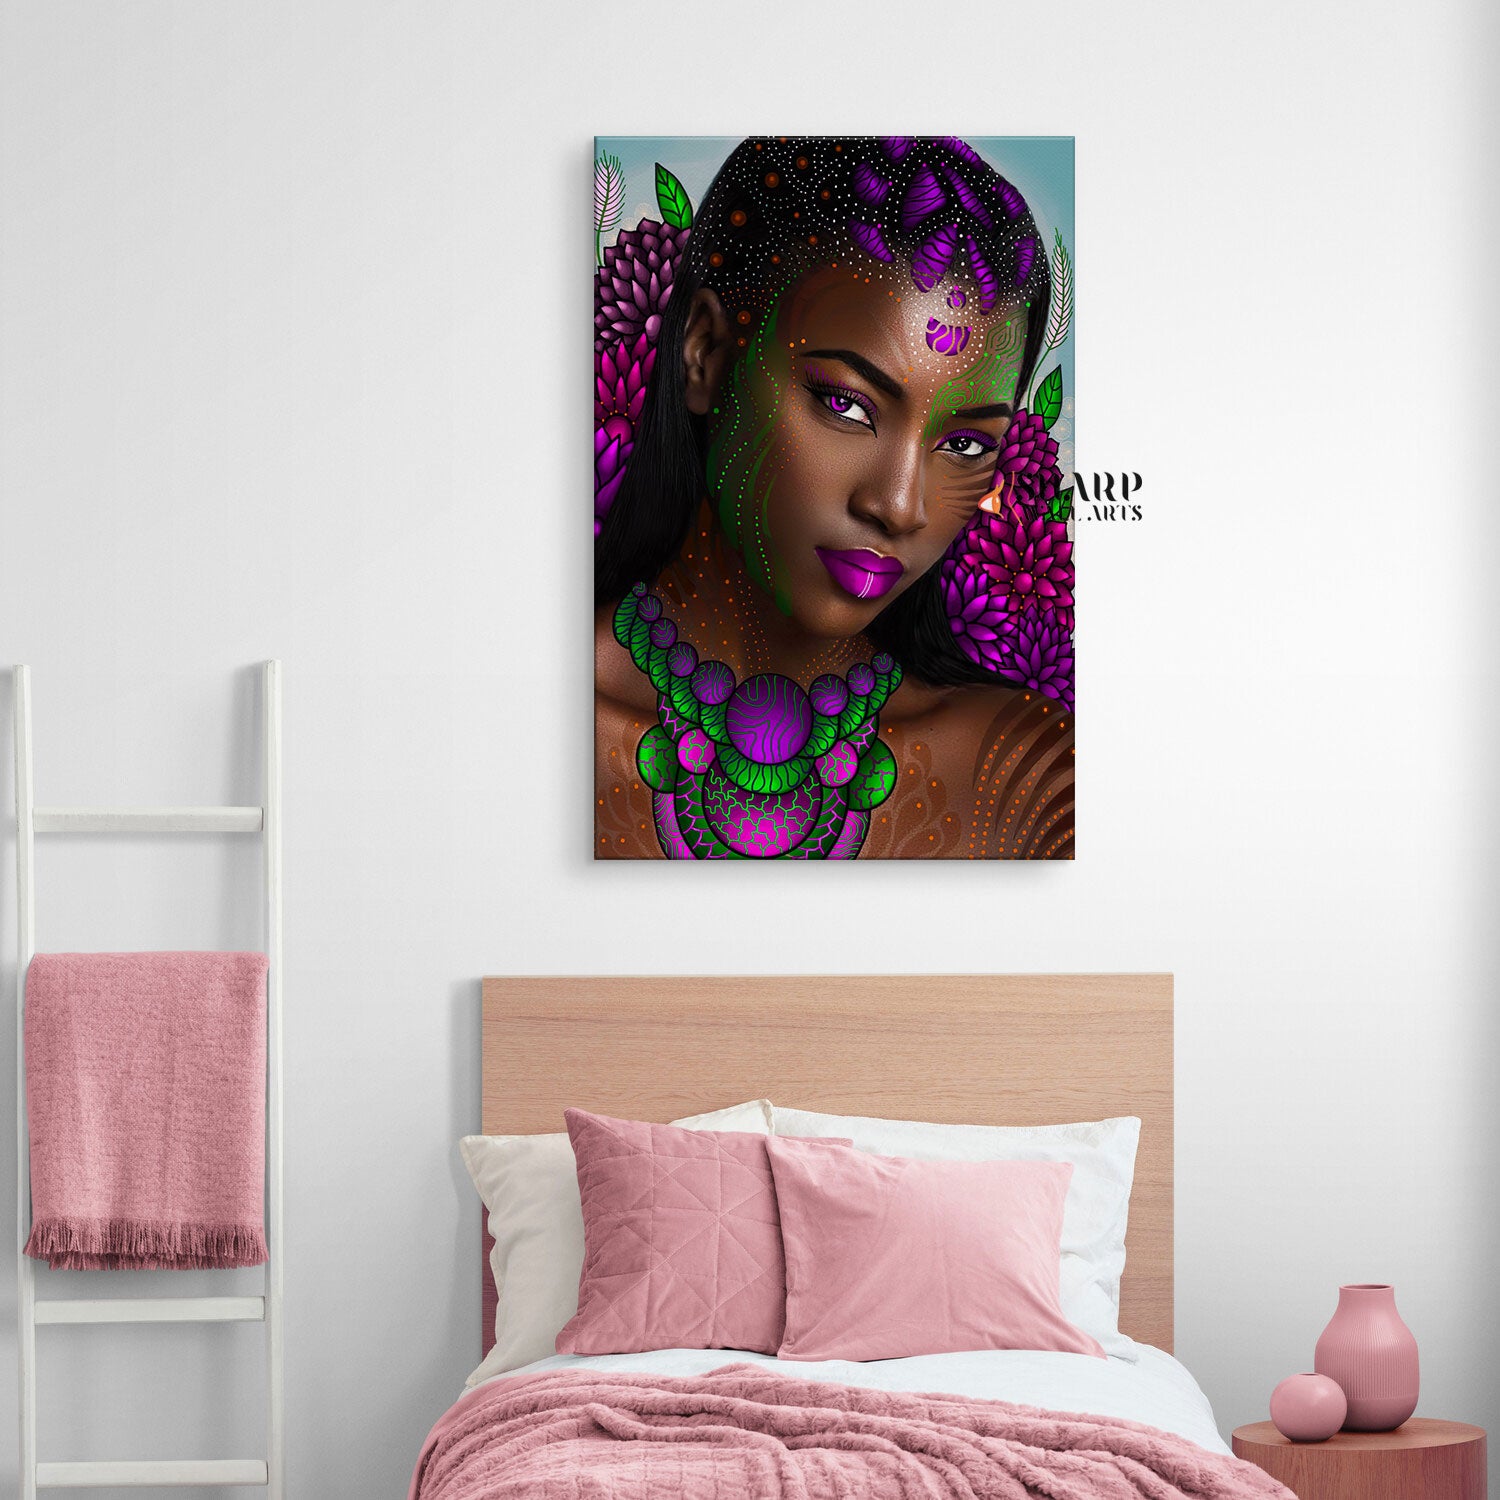 African Tribal Facial Features Wall Art Canvas